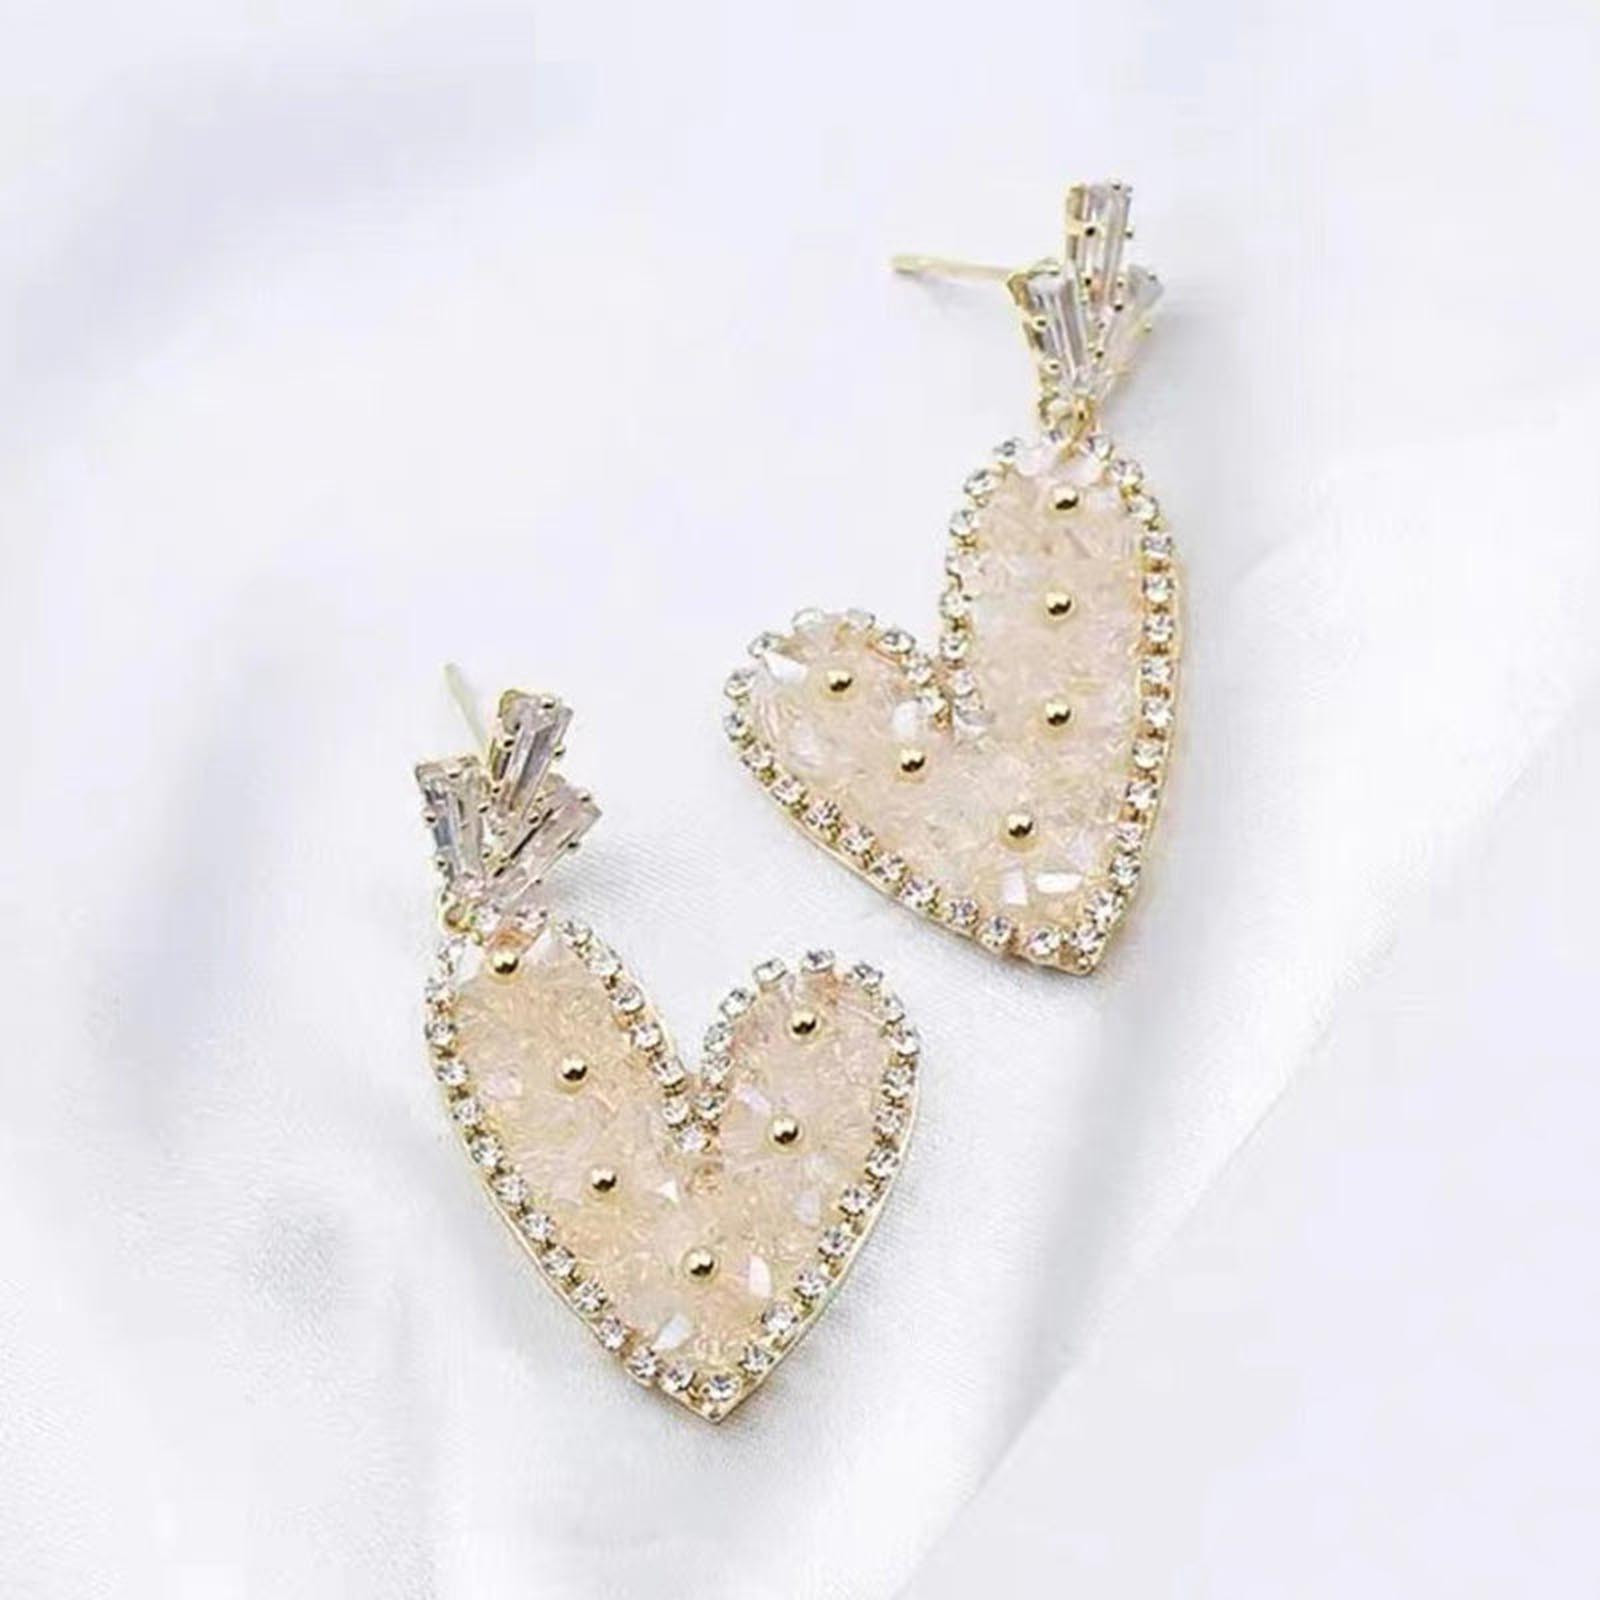 Kayannuo Gifts For Women Christmas Clearance Diamond Hollow Love Stud Earrings Temperament Inlaid Rhinestone Peach Heart Drop Earrings Christmas Gifts - image 4 of 8